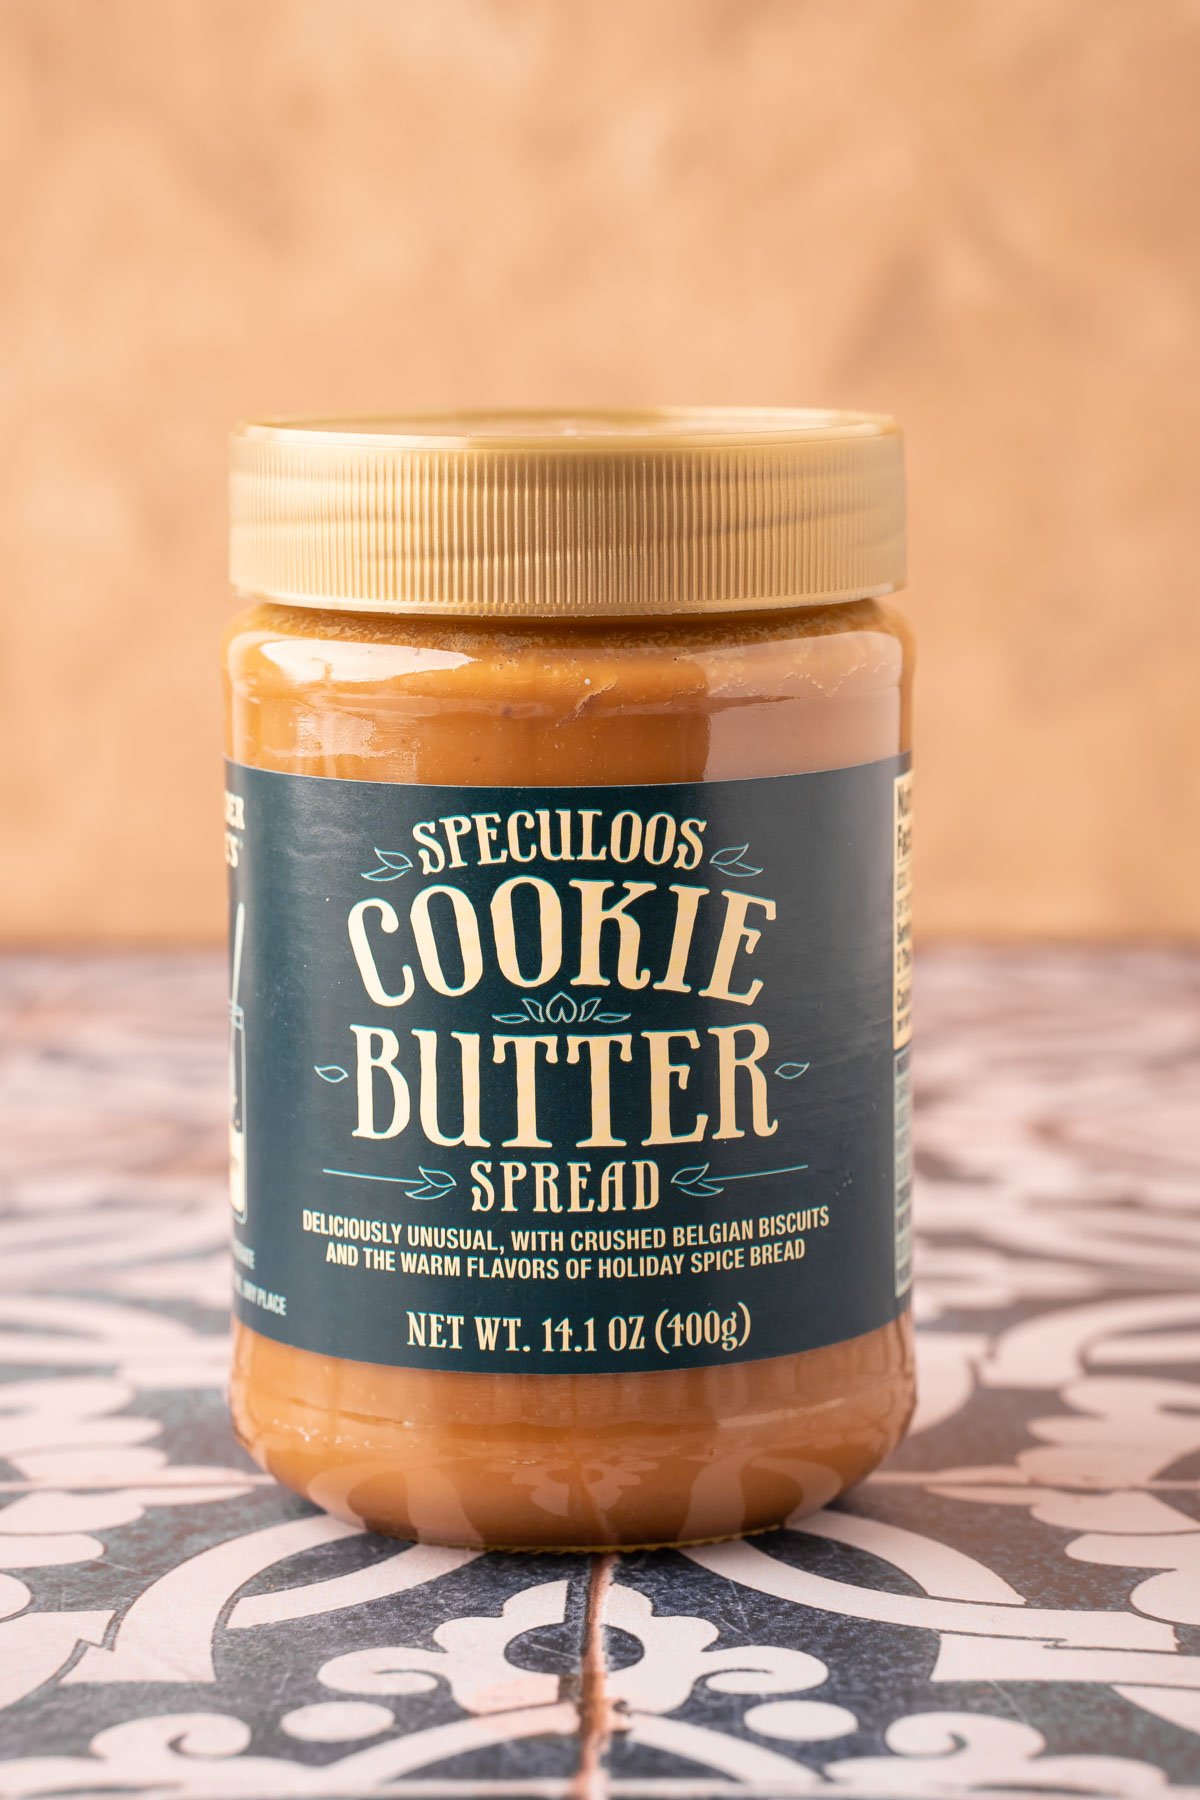 A jar of cookie butter on a table.